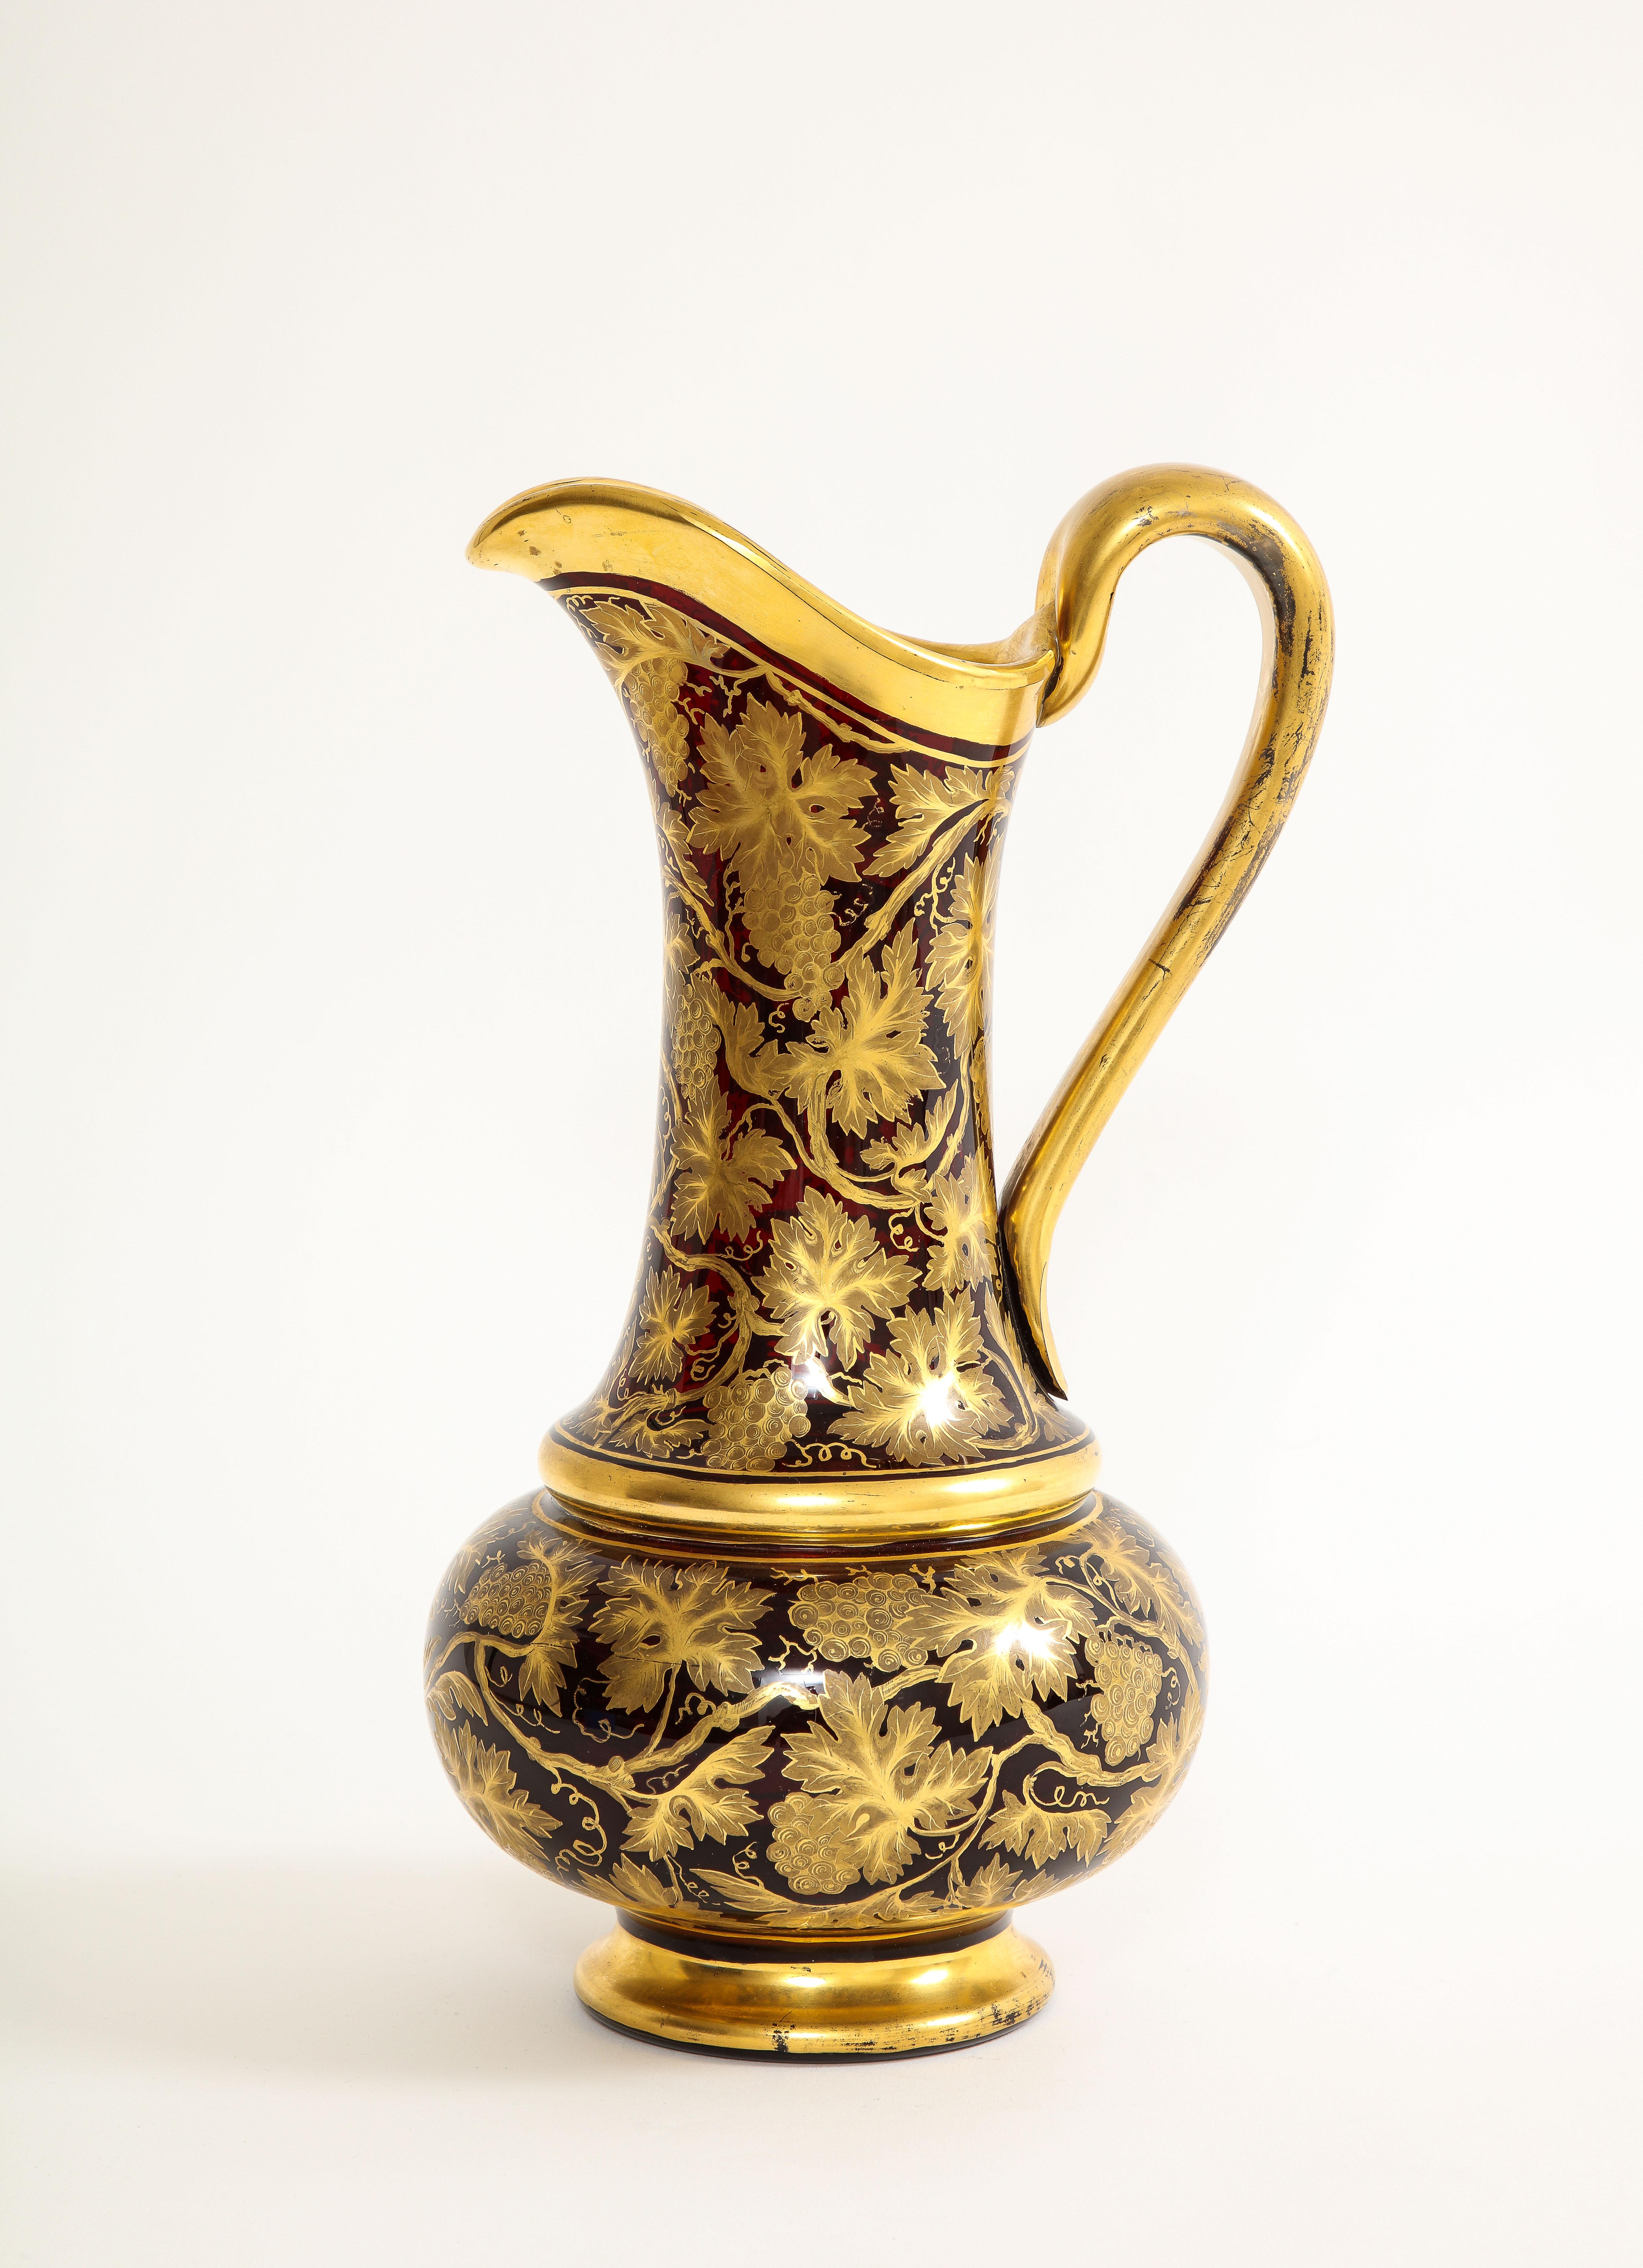 A Marvelous 19th century Bohemian Red Crystal and 24k Gold Decorated Ewer/Water Jug

Behold, this magnificent 19th century Bohemian Red Crystal Gilt Ewer is a true masterpiece of antique artistry. As you gaze upon this stunning piece, you will be